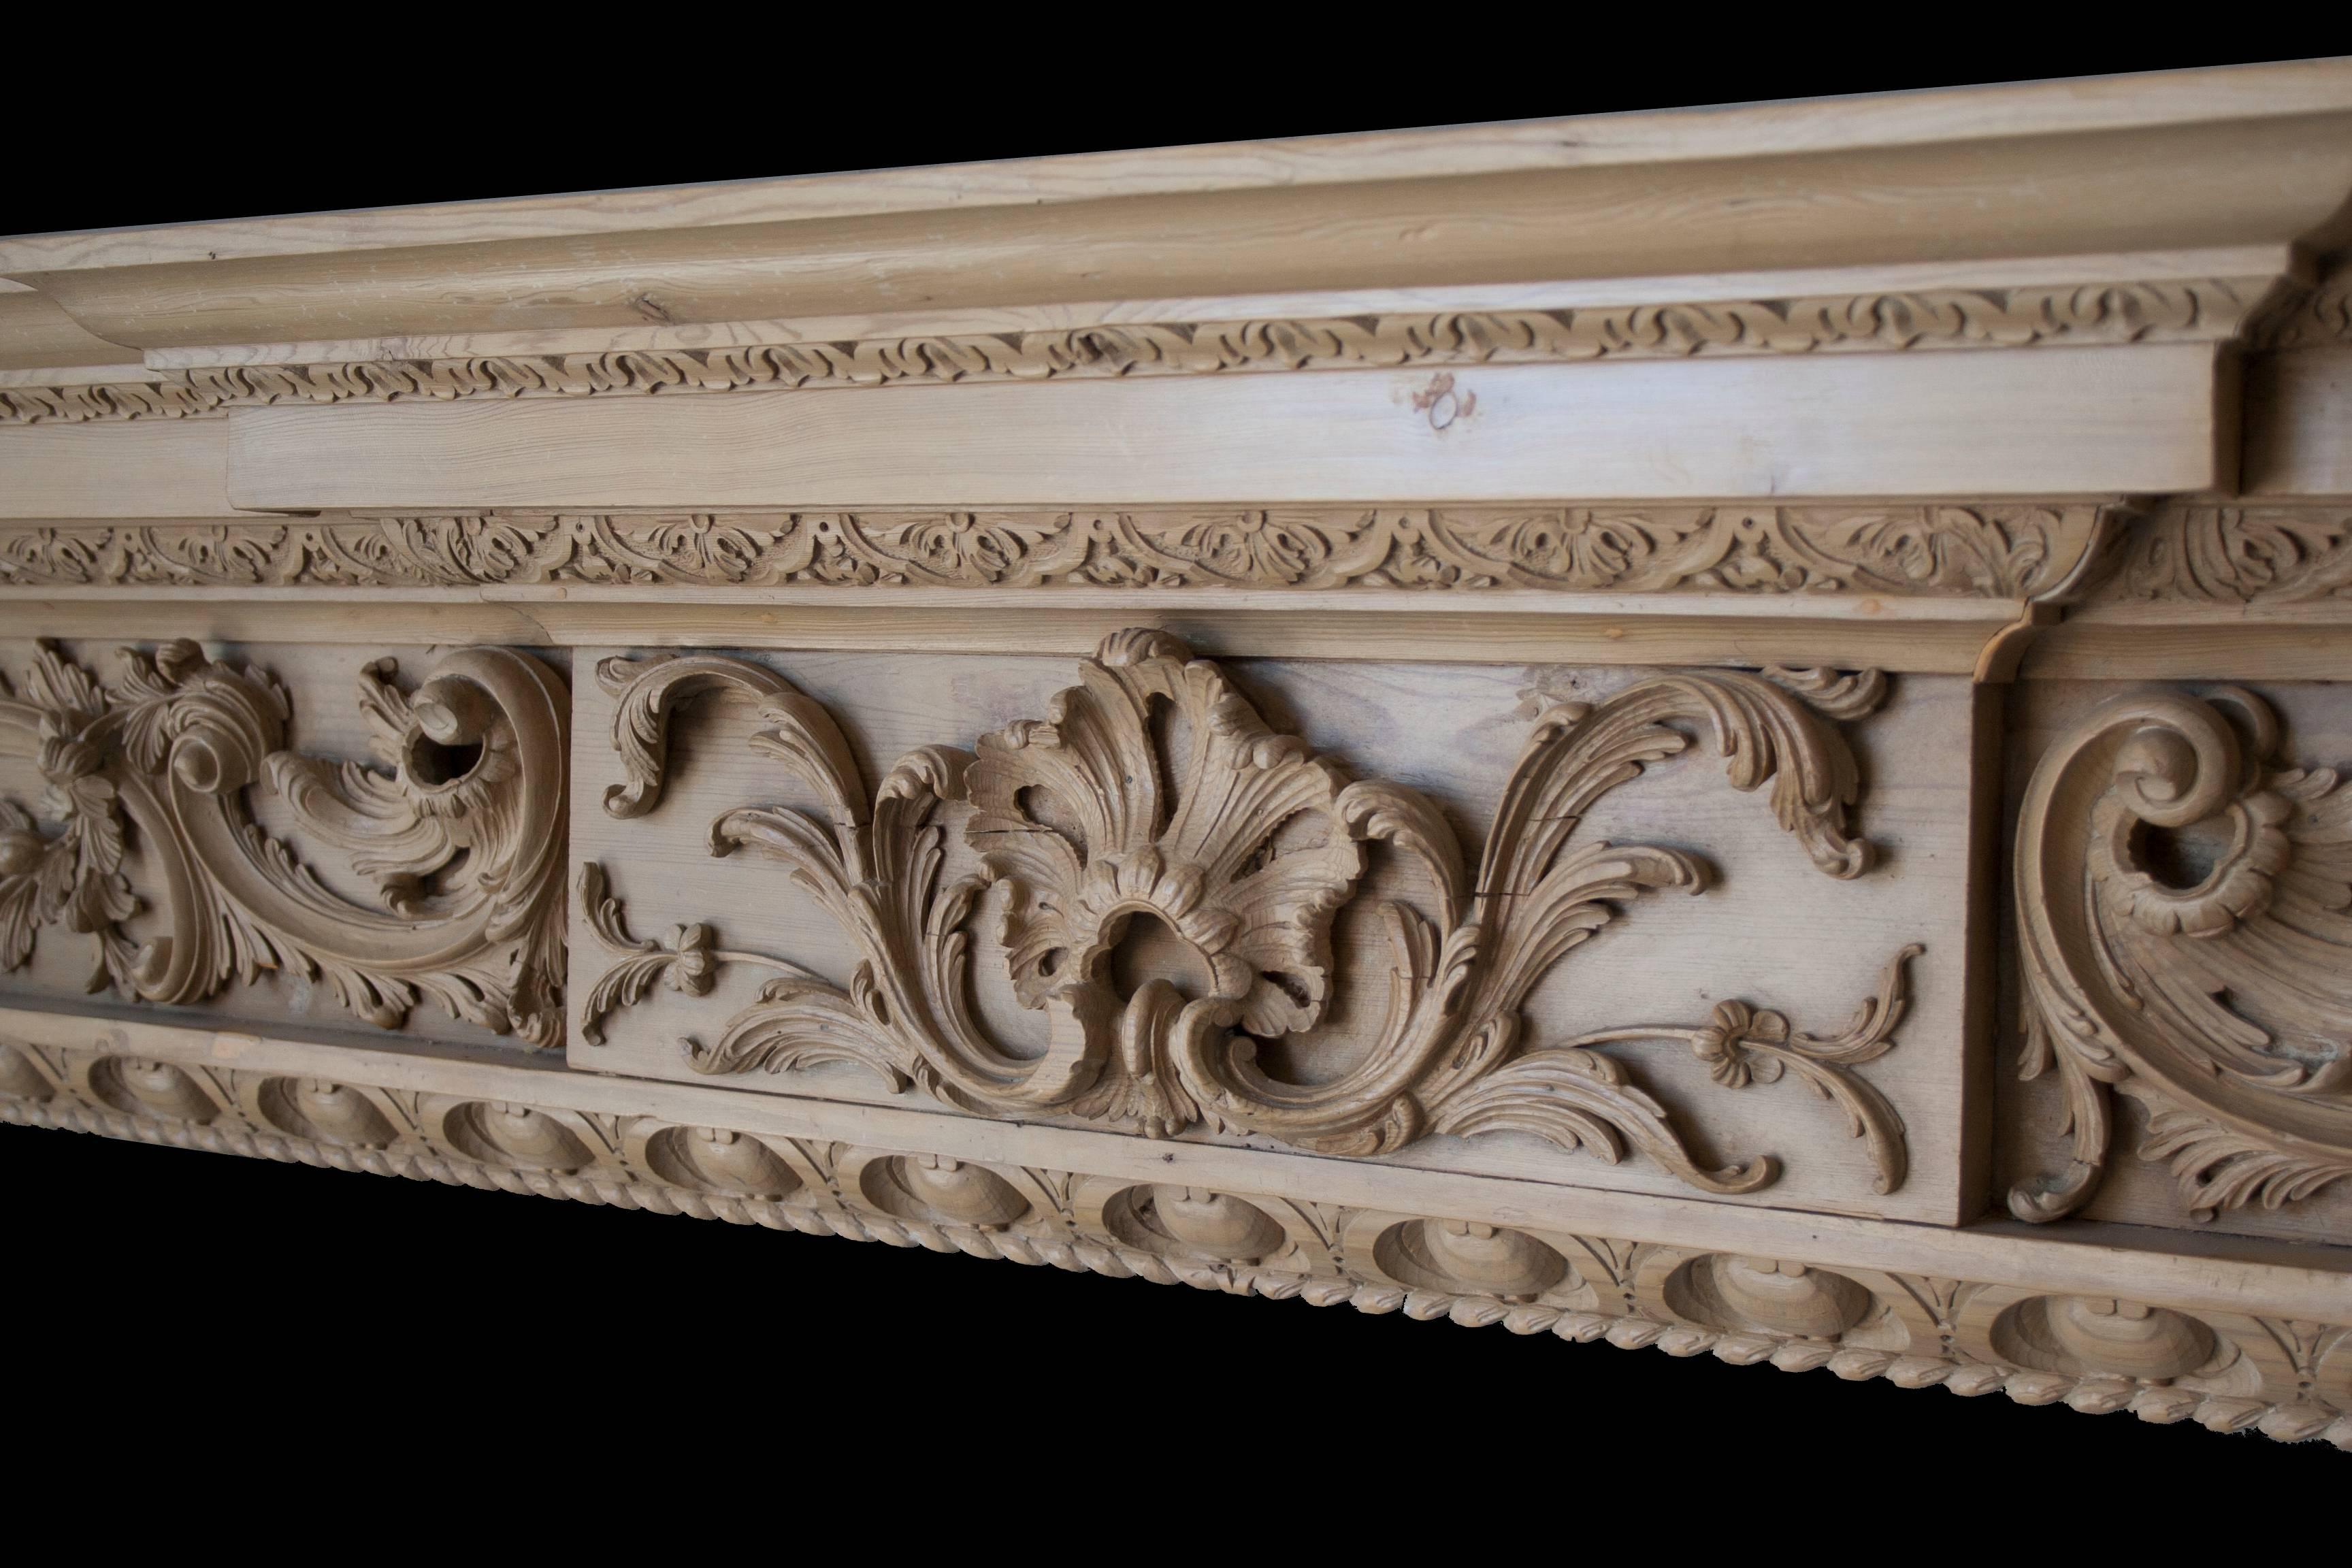 A fine Rococo style antique pine fireplace surround in the Georgian manner, with a richly carved floral frieze centred by a large shell cartouche and with lambs tongue, egg and dart undershelf carving and acanthus leaf detail around the opening. We